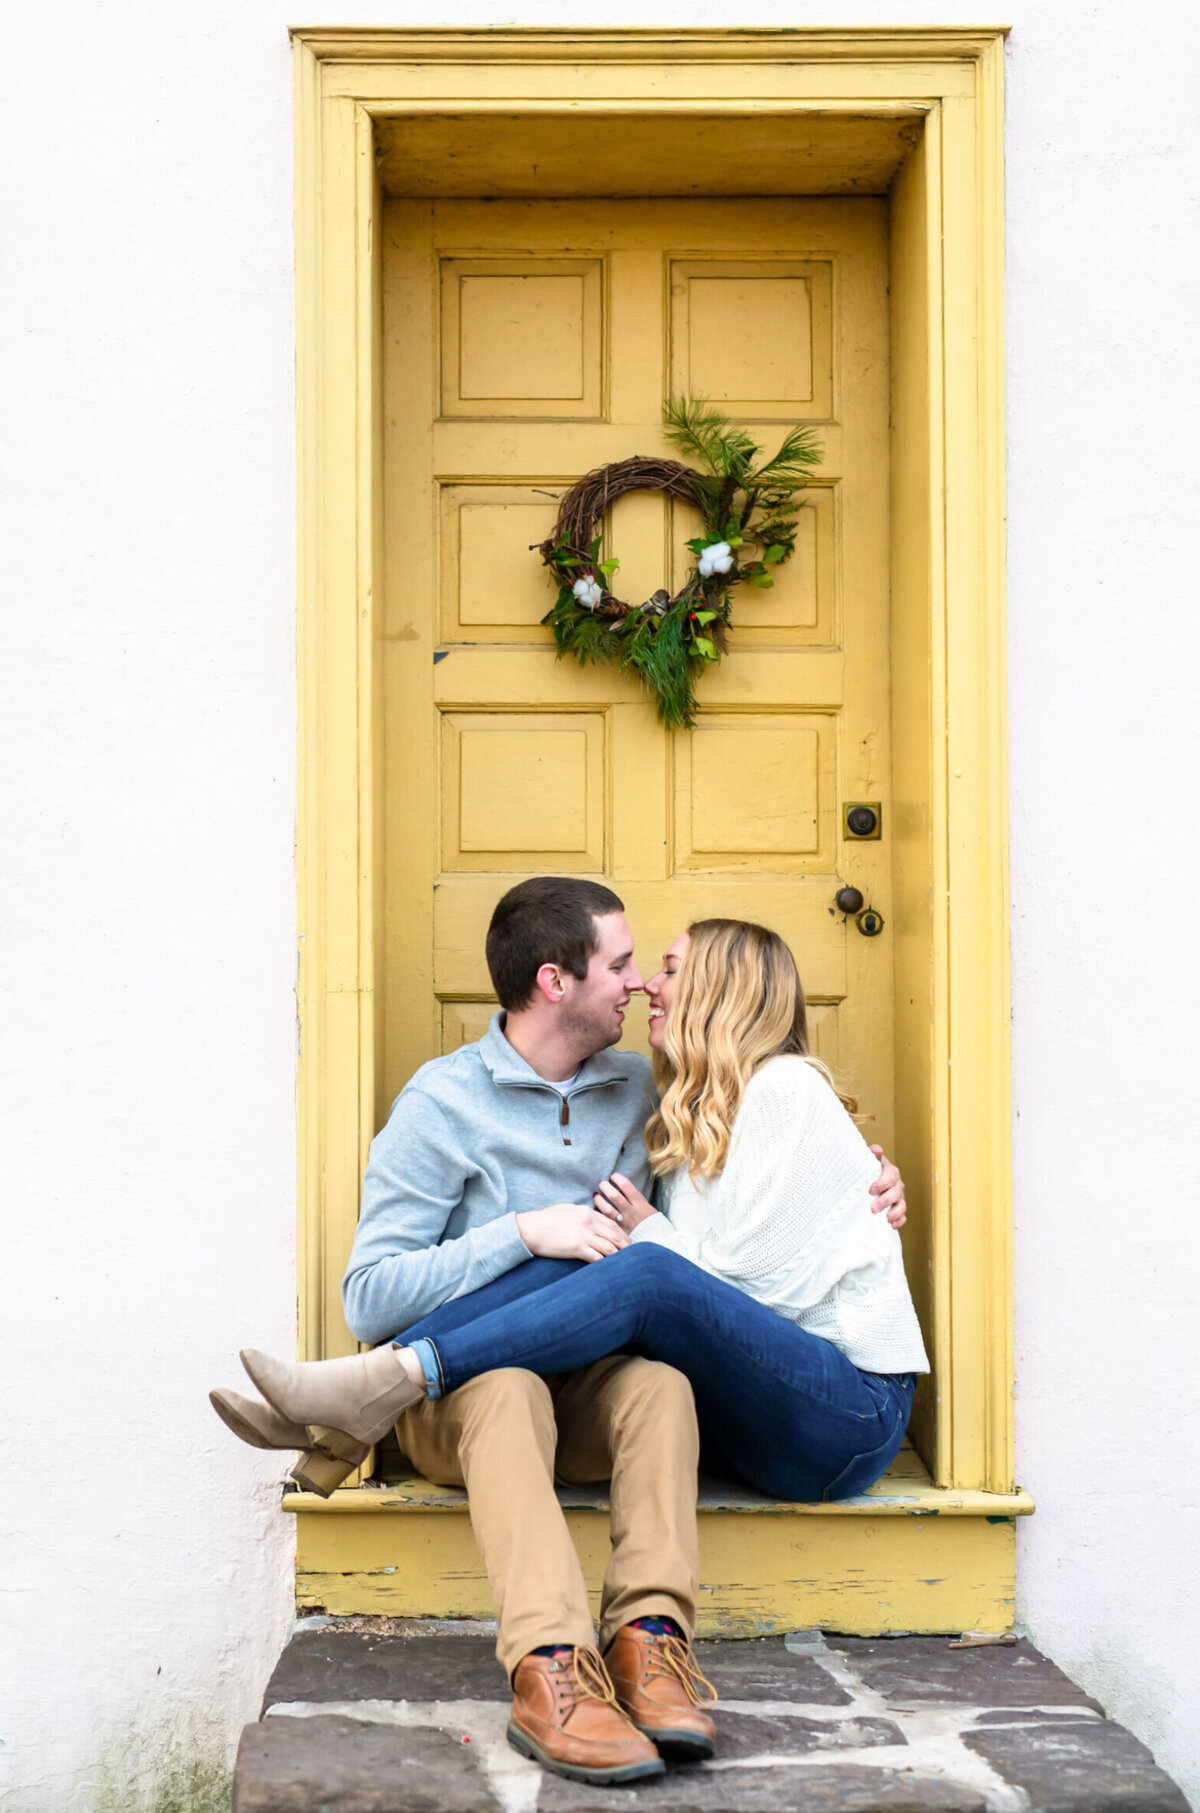 Man and woman snuggled in front of a yellow door in Washington crossing park